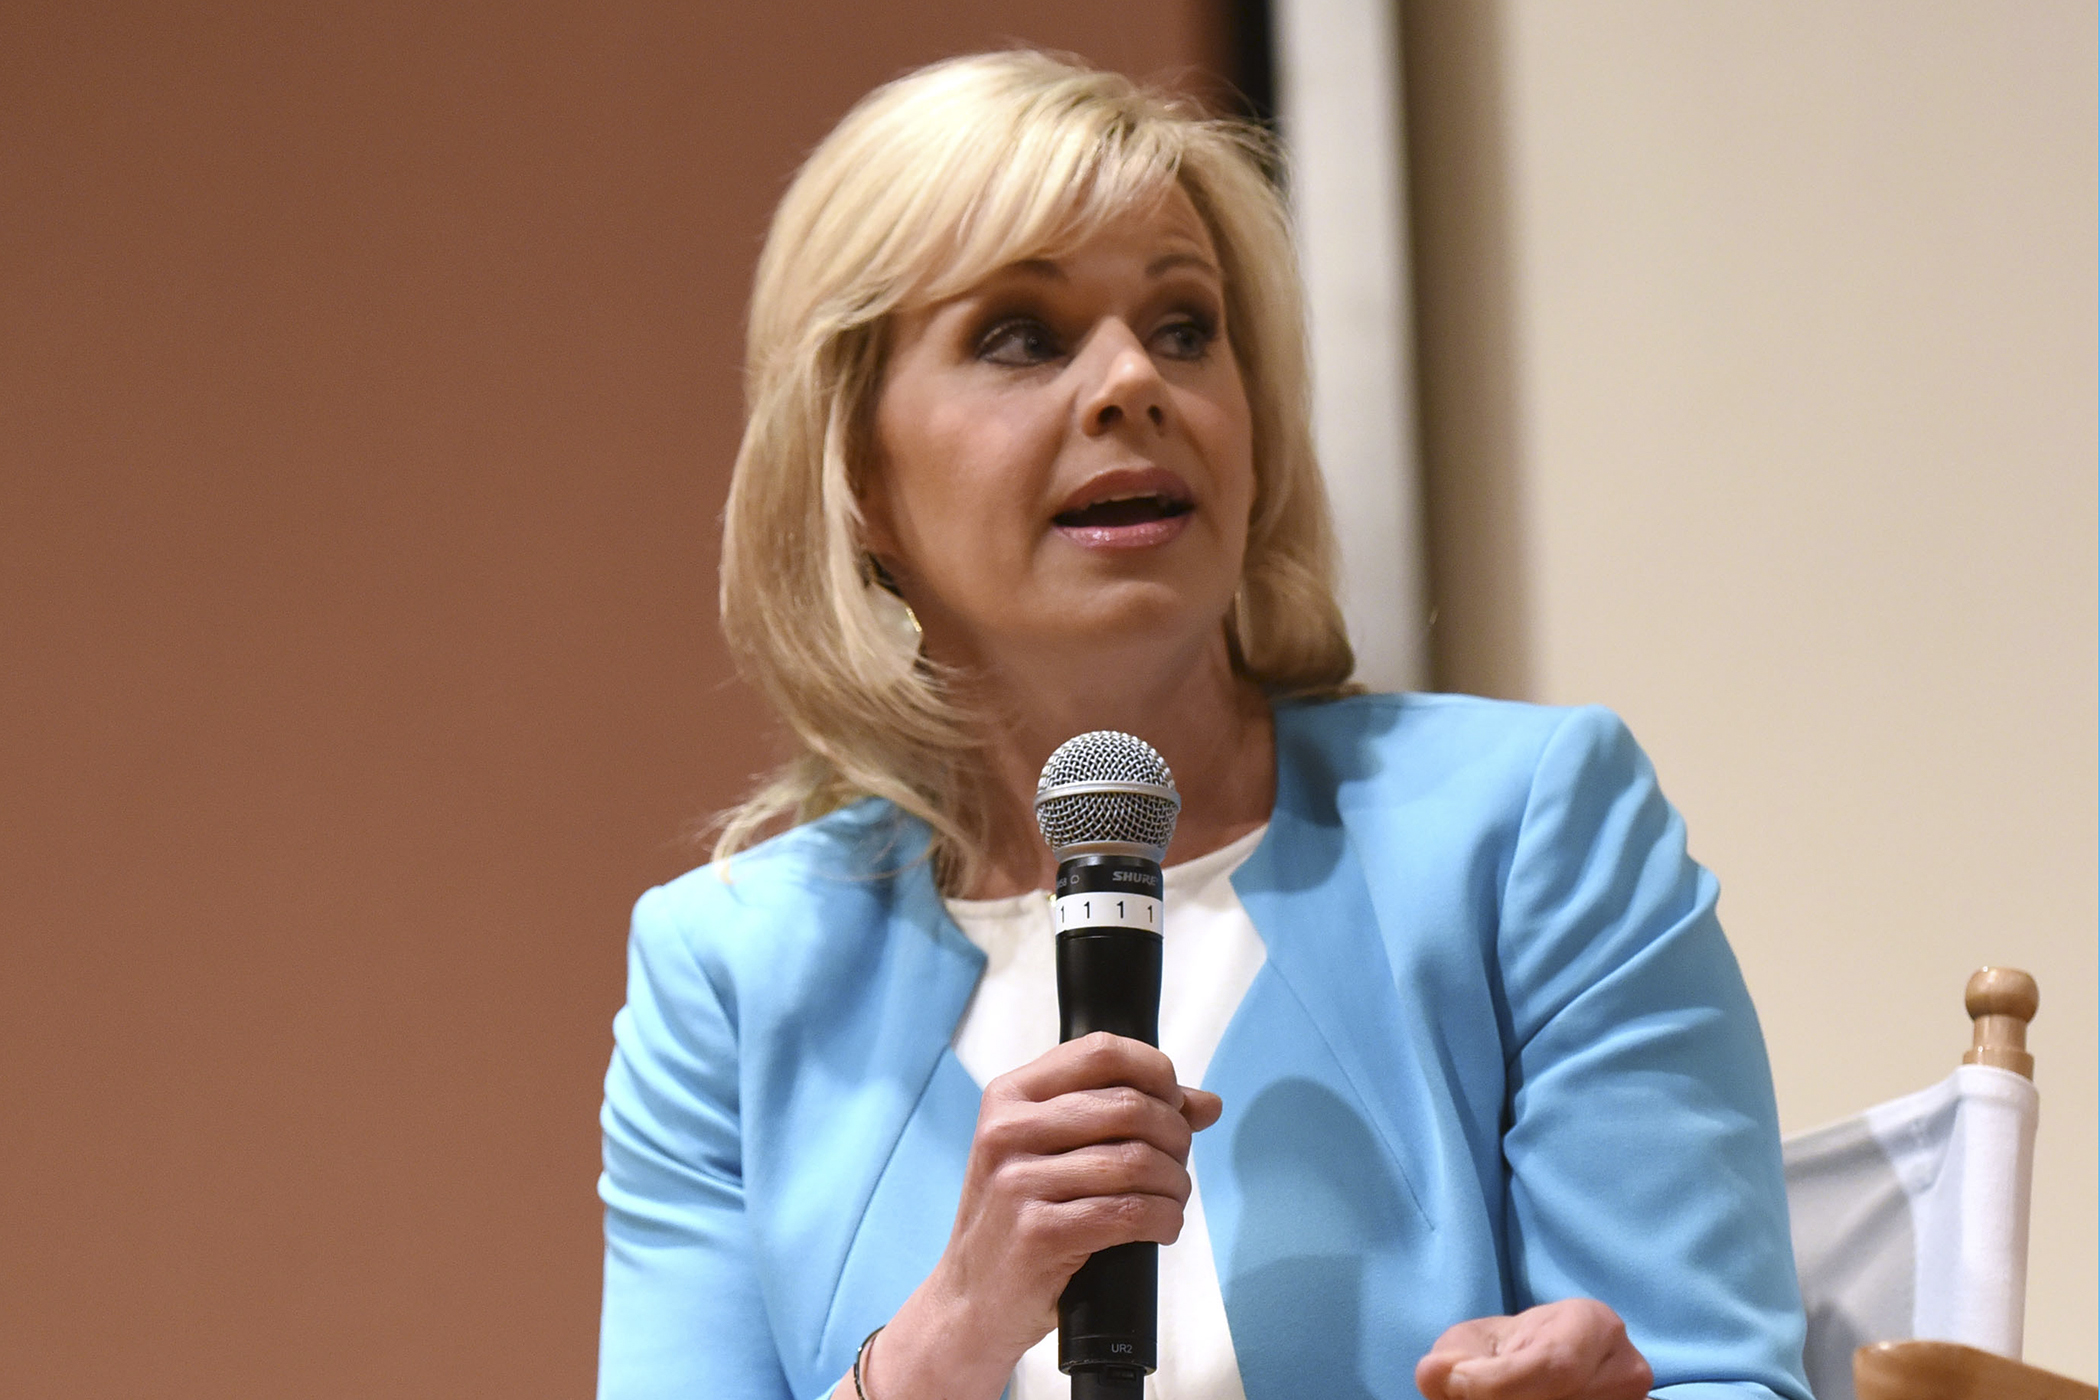 Gretchen Carlson speaks Women at the Top: Female Empowerment in Media Panel at the 2016 Greenwich International Film Festival on June 12, 2016 in Greenwich, Connecticut. (Noam Galai&mdash;Getty Images for GIFF)